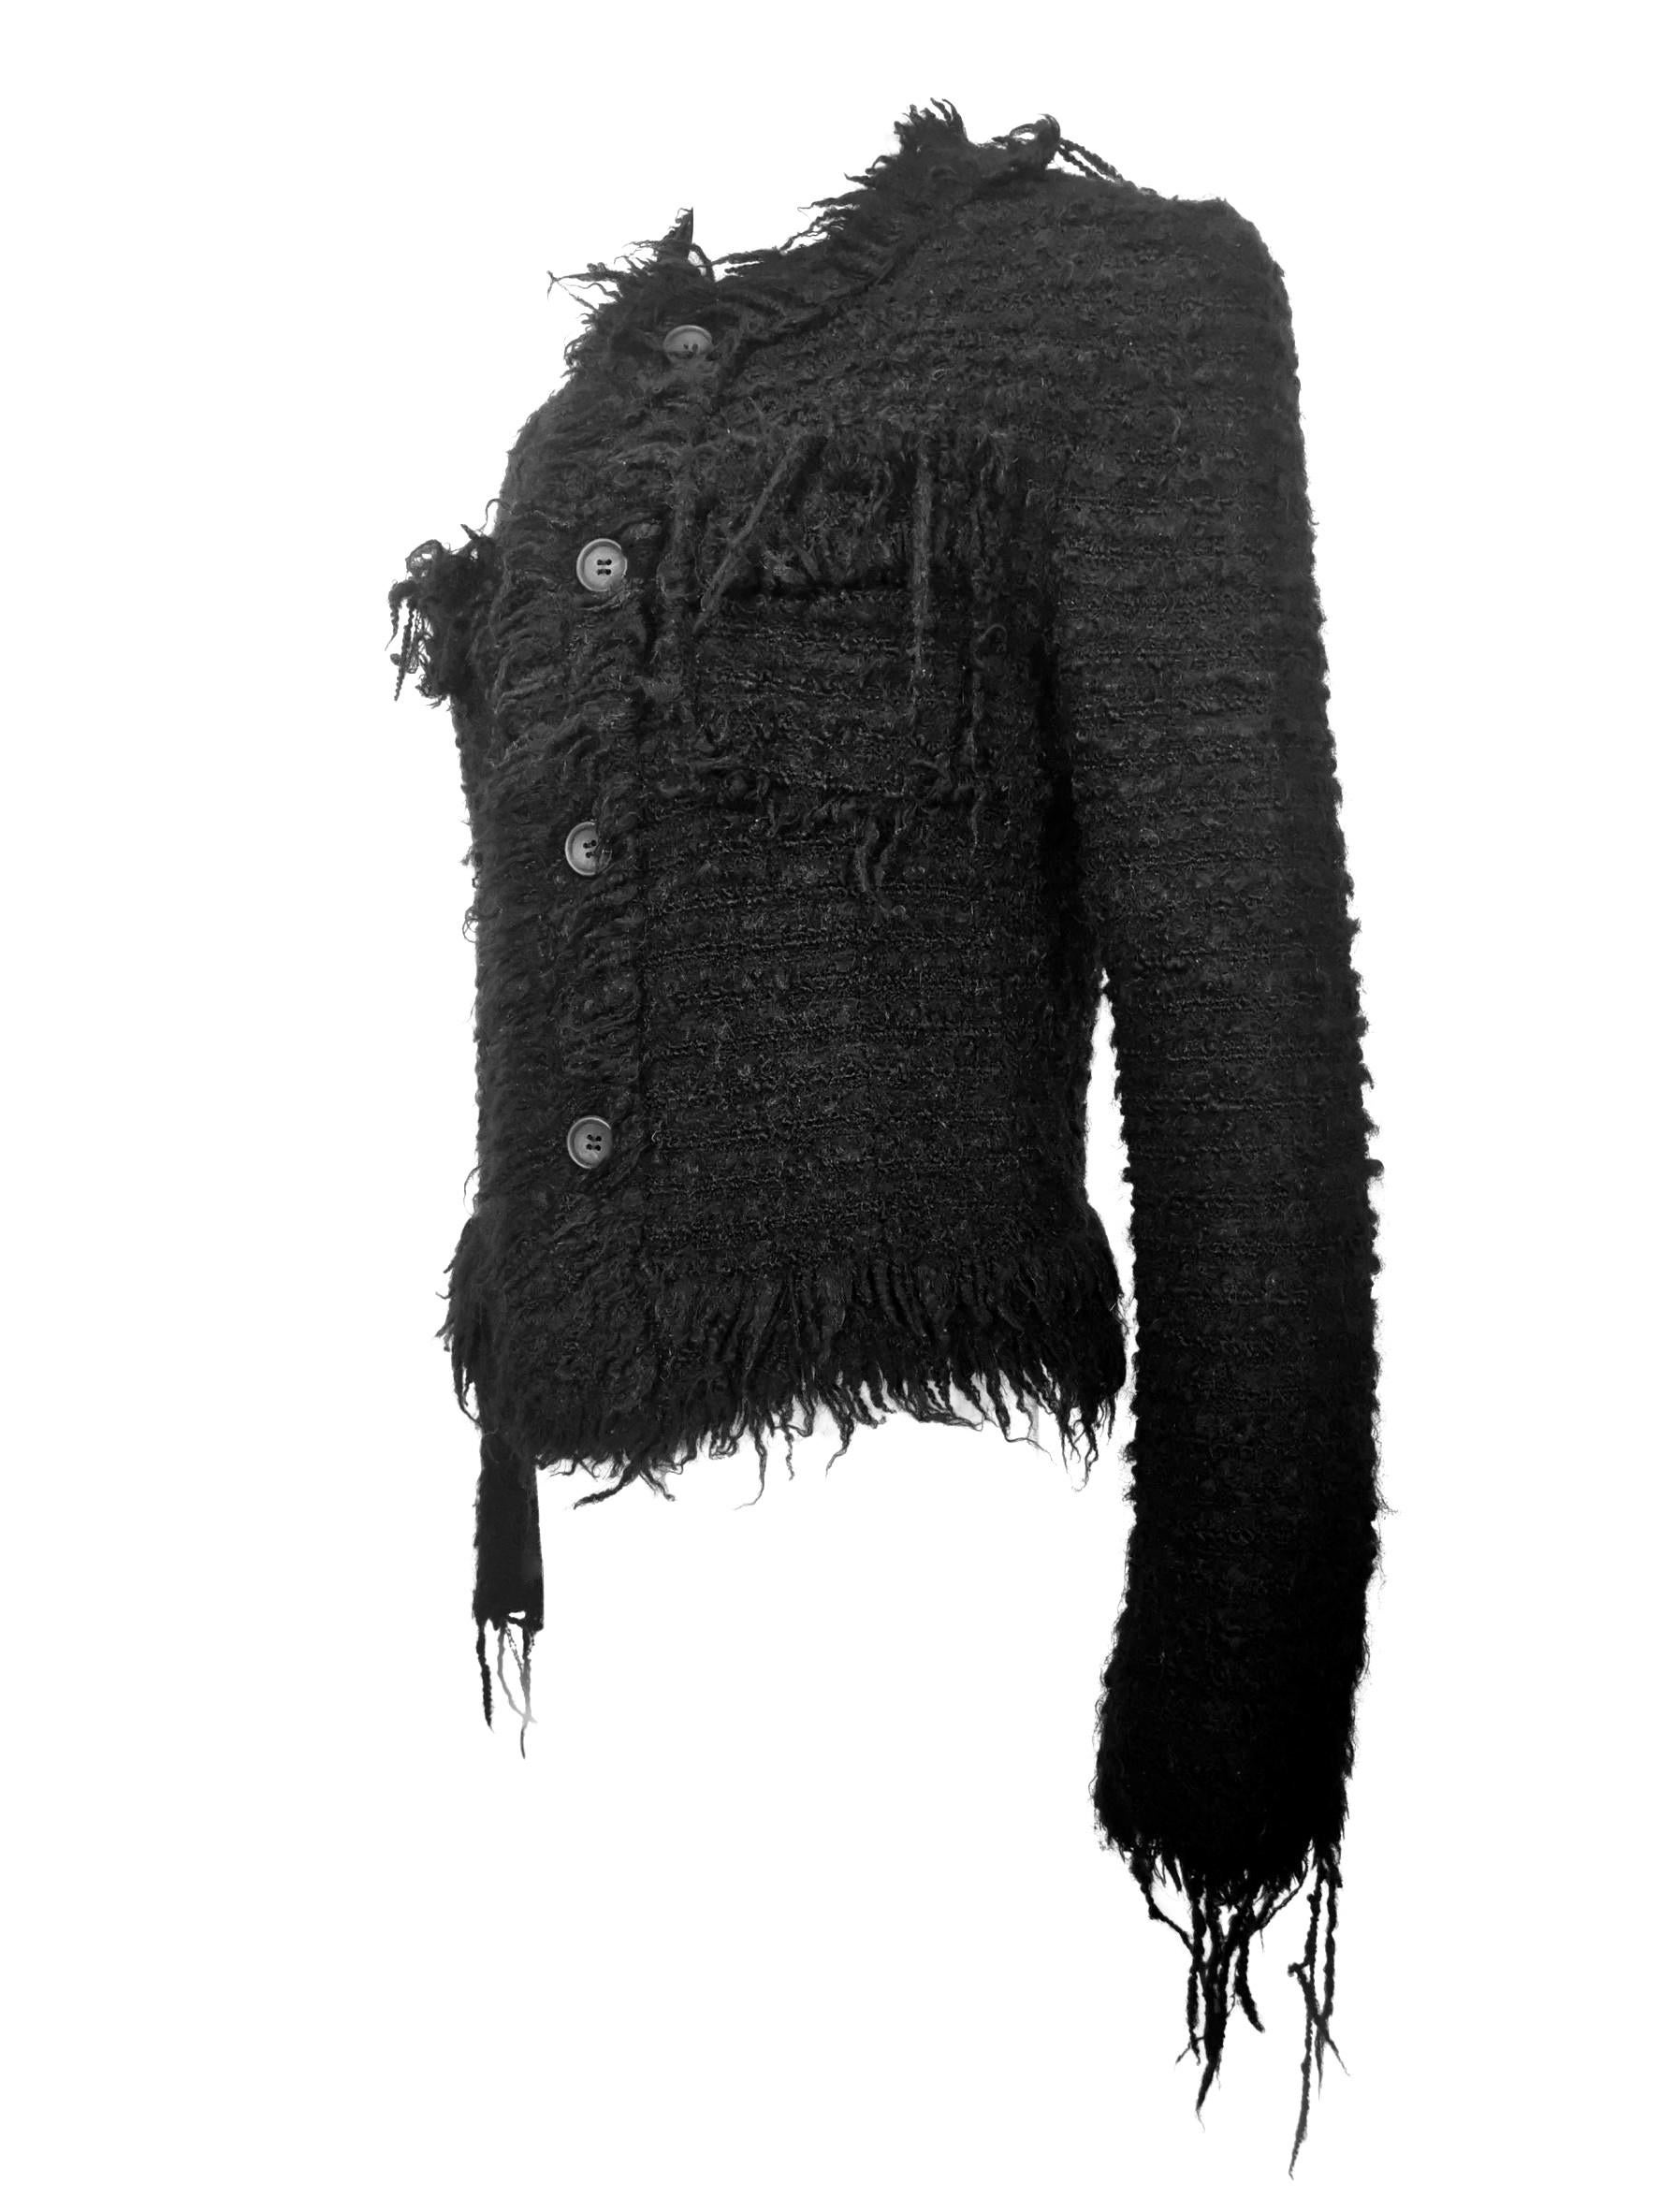 Junya Watanabe Comme des Garcons
AD 2003
Wool/Mohair Chanel Style Fringe Jacket
Size S